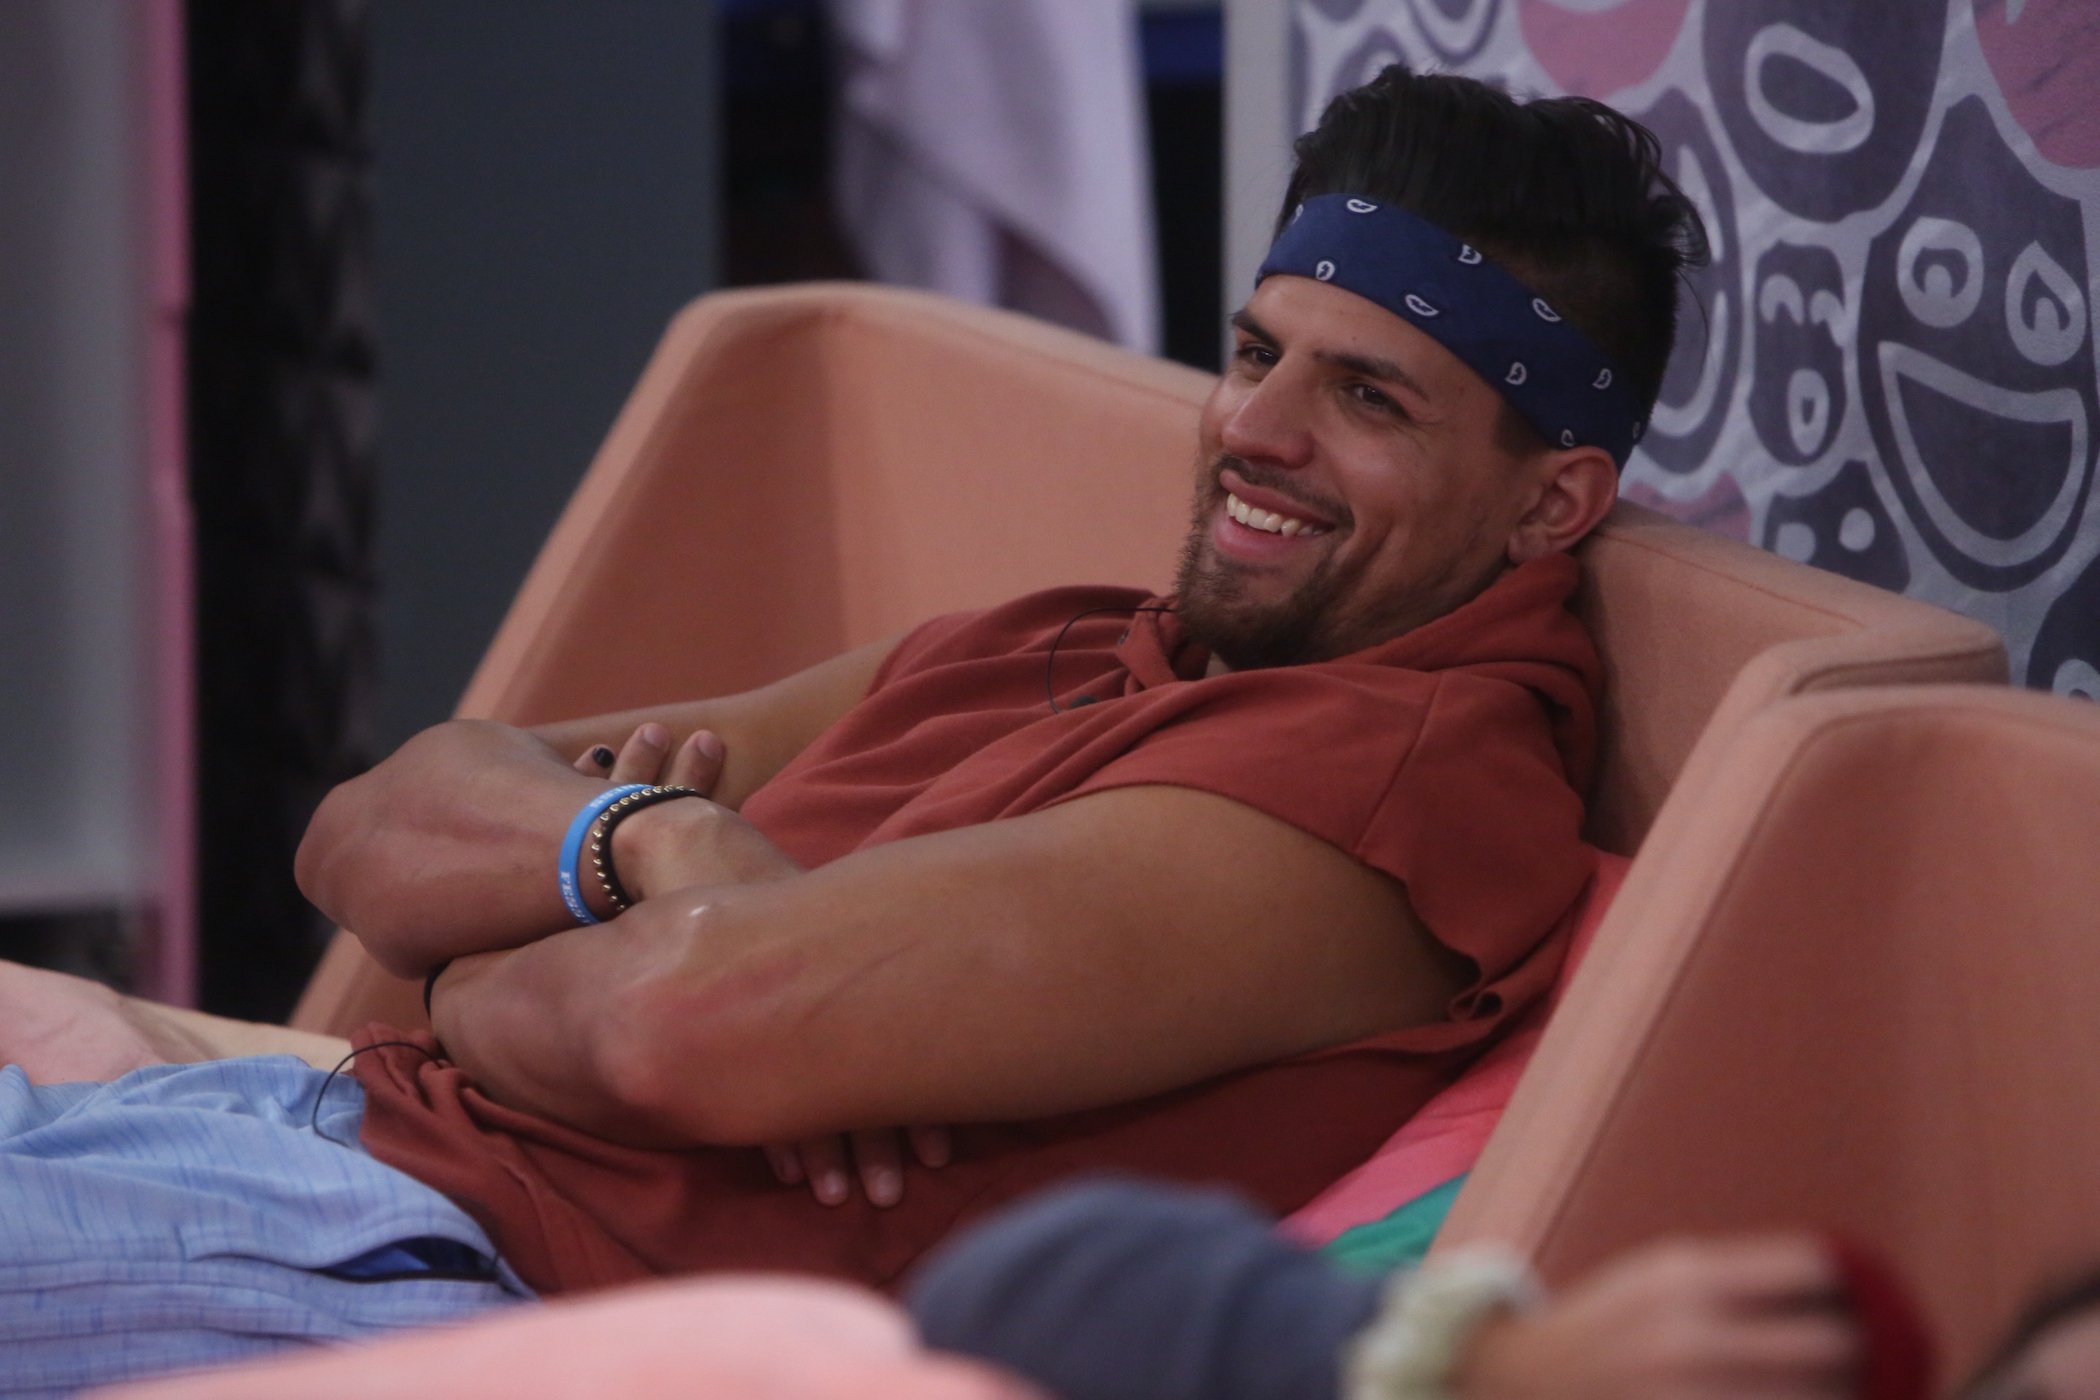 maske Prædike Centrum The Challenge' Season 37: Fessy Is Selling His Personal Items From the  Show, Fans Think He's Desperate for Cash